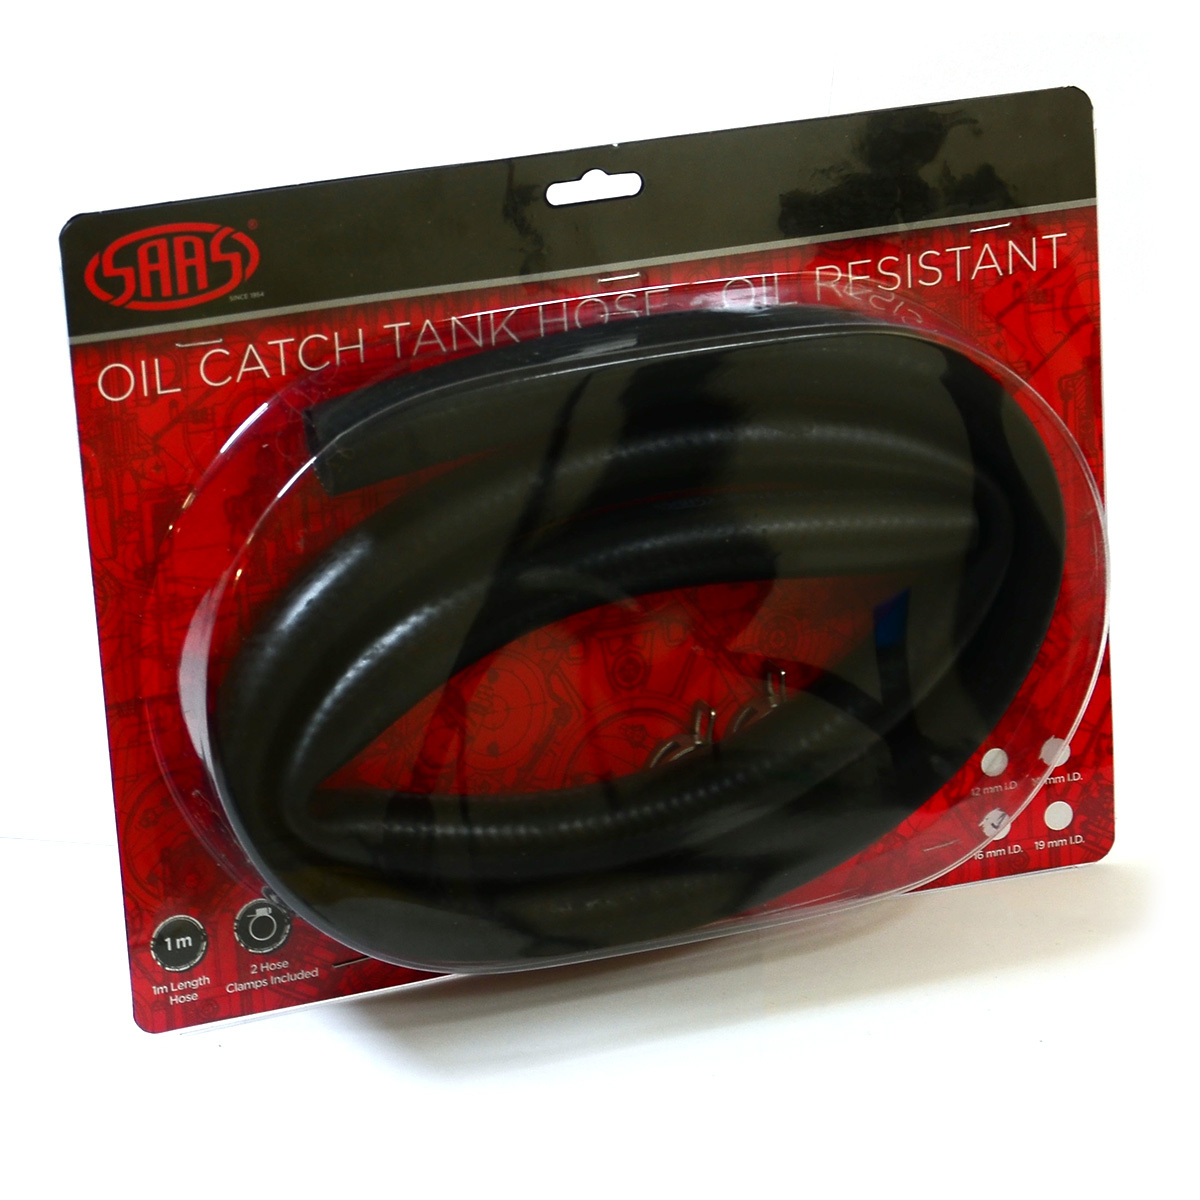 Oil Resistant Hose 19mm (3/4) ID x 1M + 2 Clamps